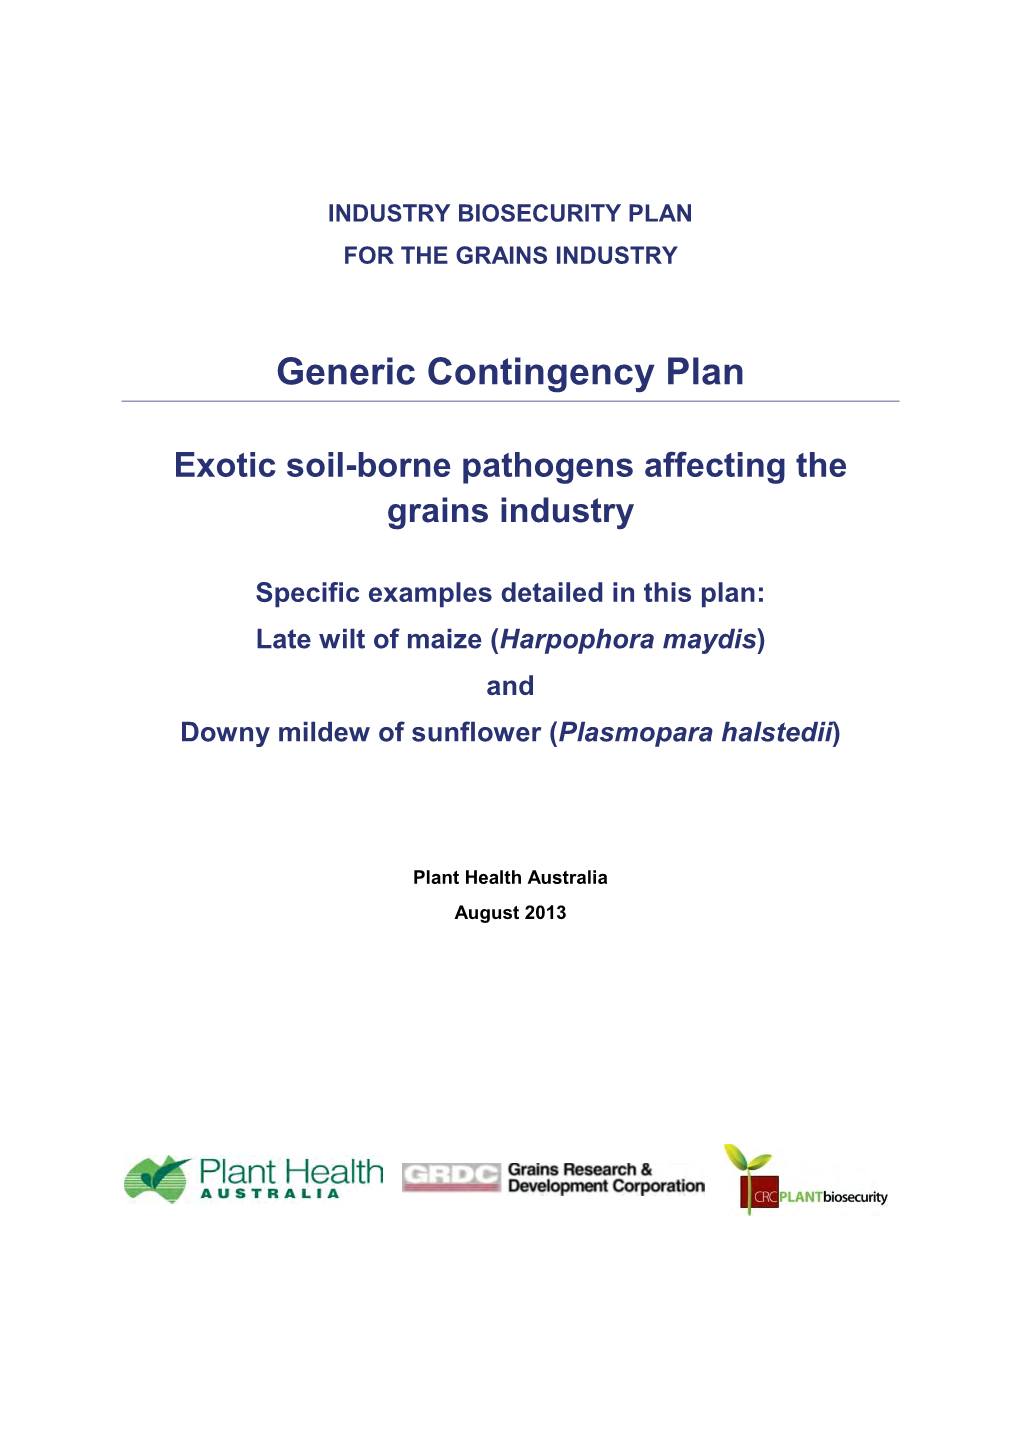 Exotic Soil-Borne Pathogens Affecting the Grains Industry